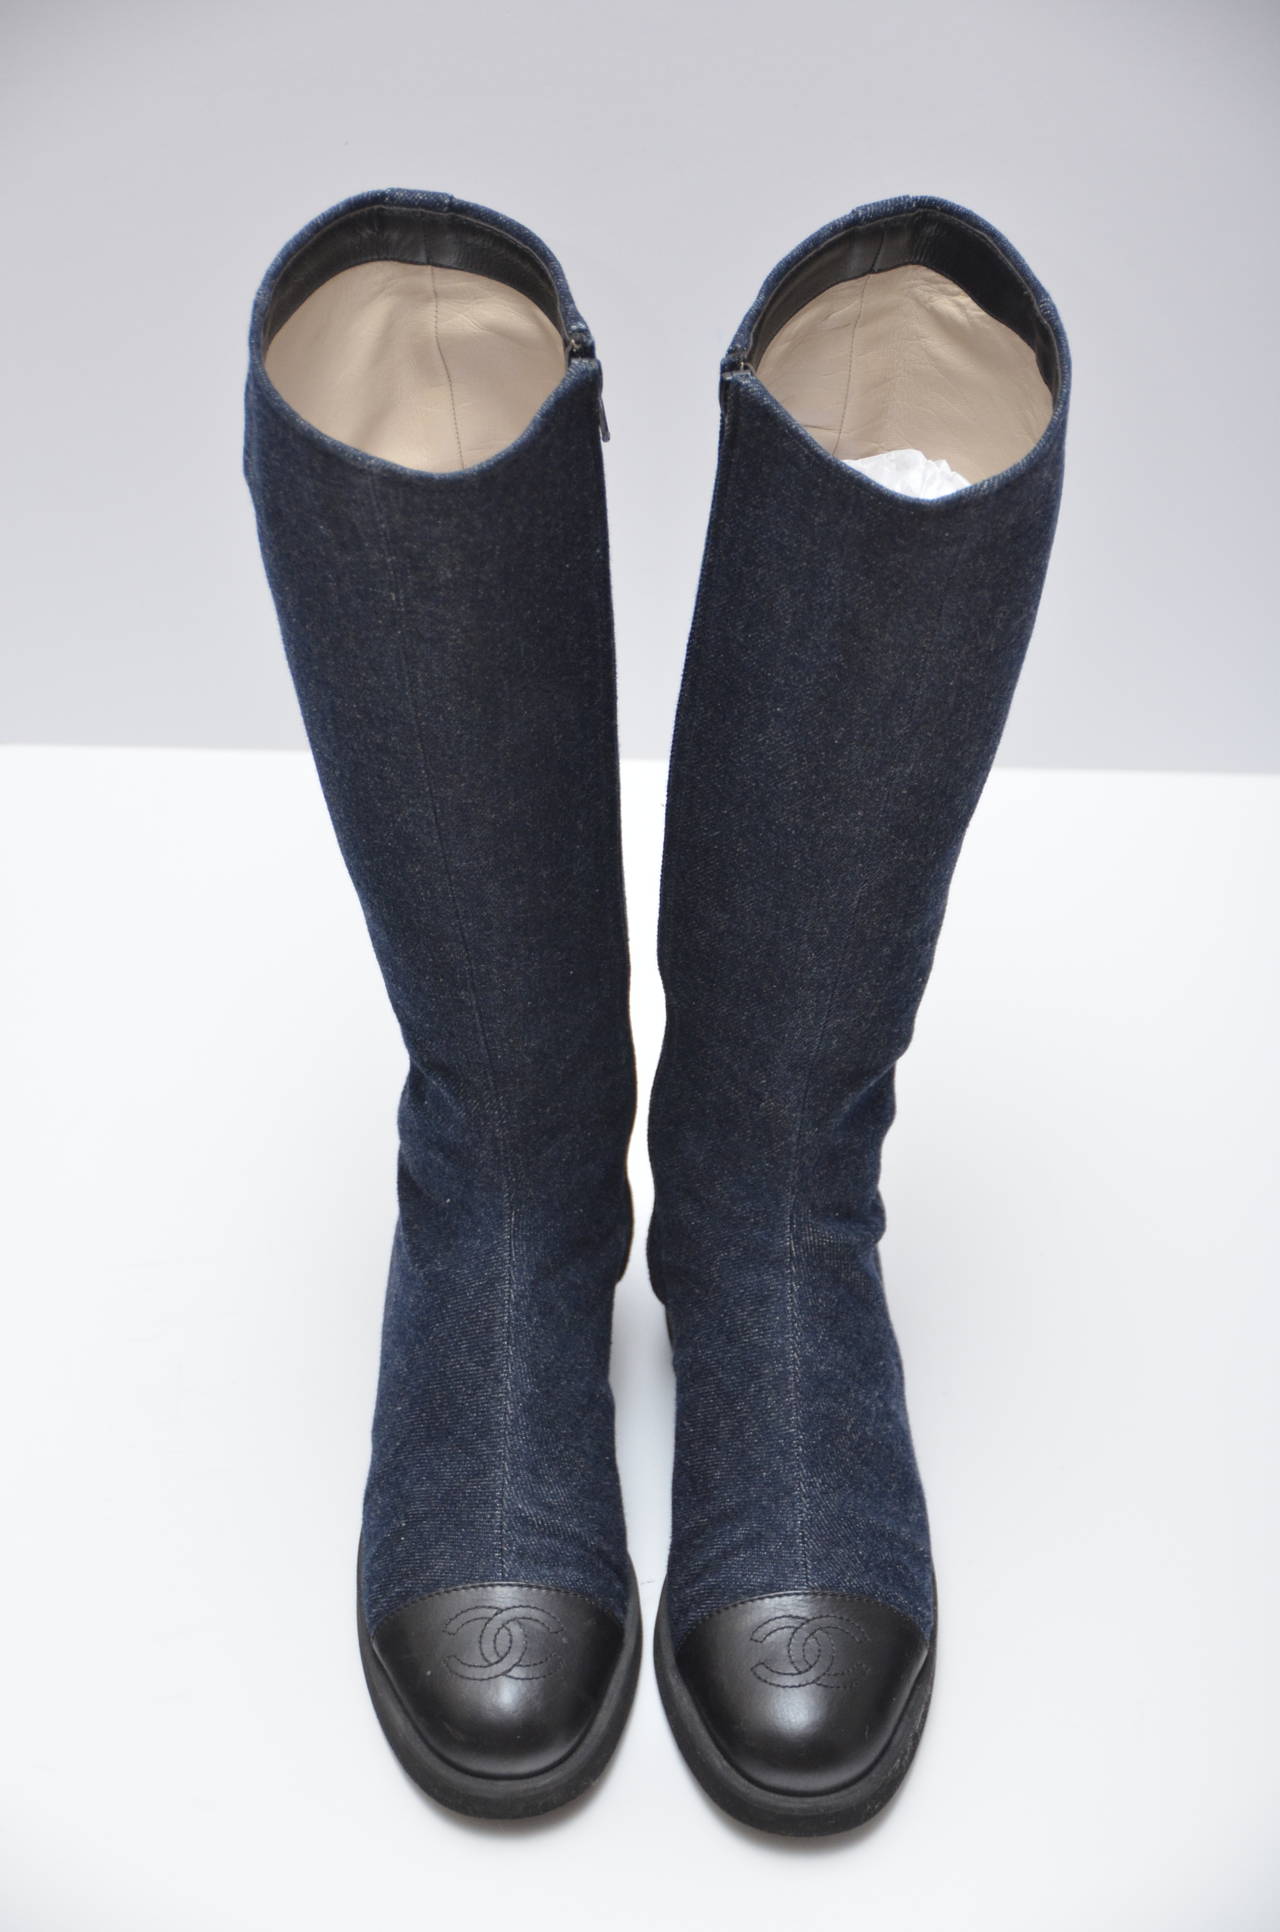 Chanel vintage denim boots.Size not marked.
I believe they are size 37.Insole measure about 9.25